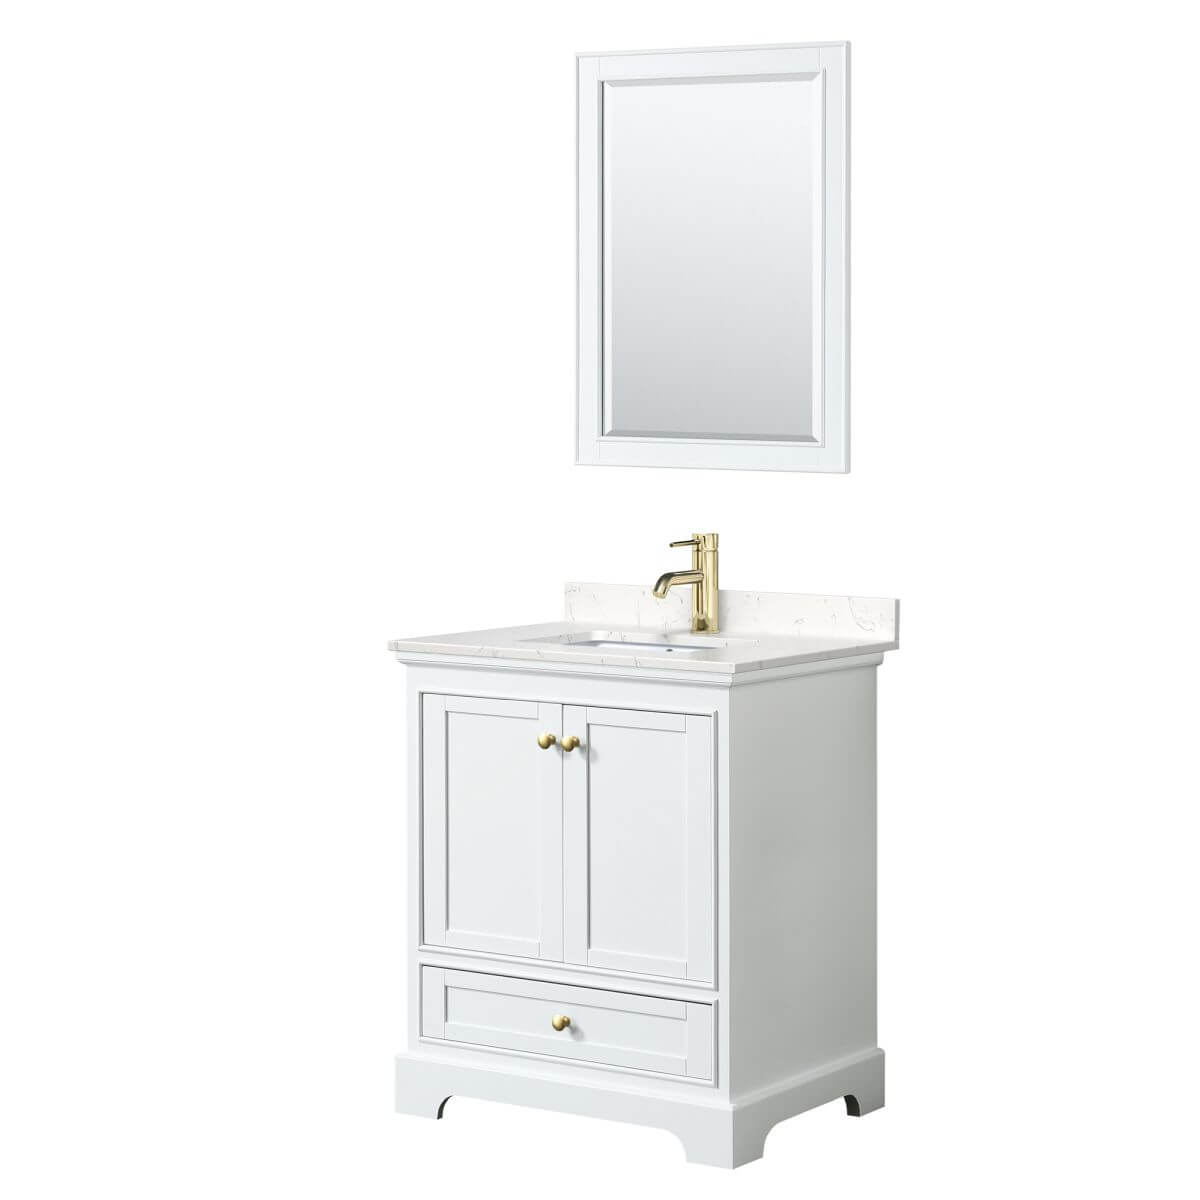 Wyndham Collection Deborah 30 inch Single Bathroom Vanity in White with Carrara Cultured Marble Countertop, Undermount Square Sink, Brushed Gold Trim and 24 inch Mirror - WCS202030SWGC2UNSM24